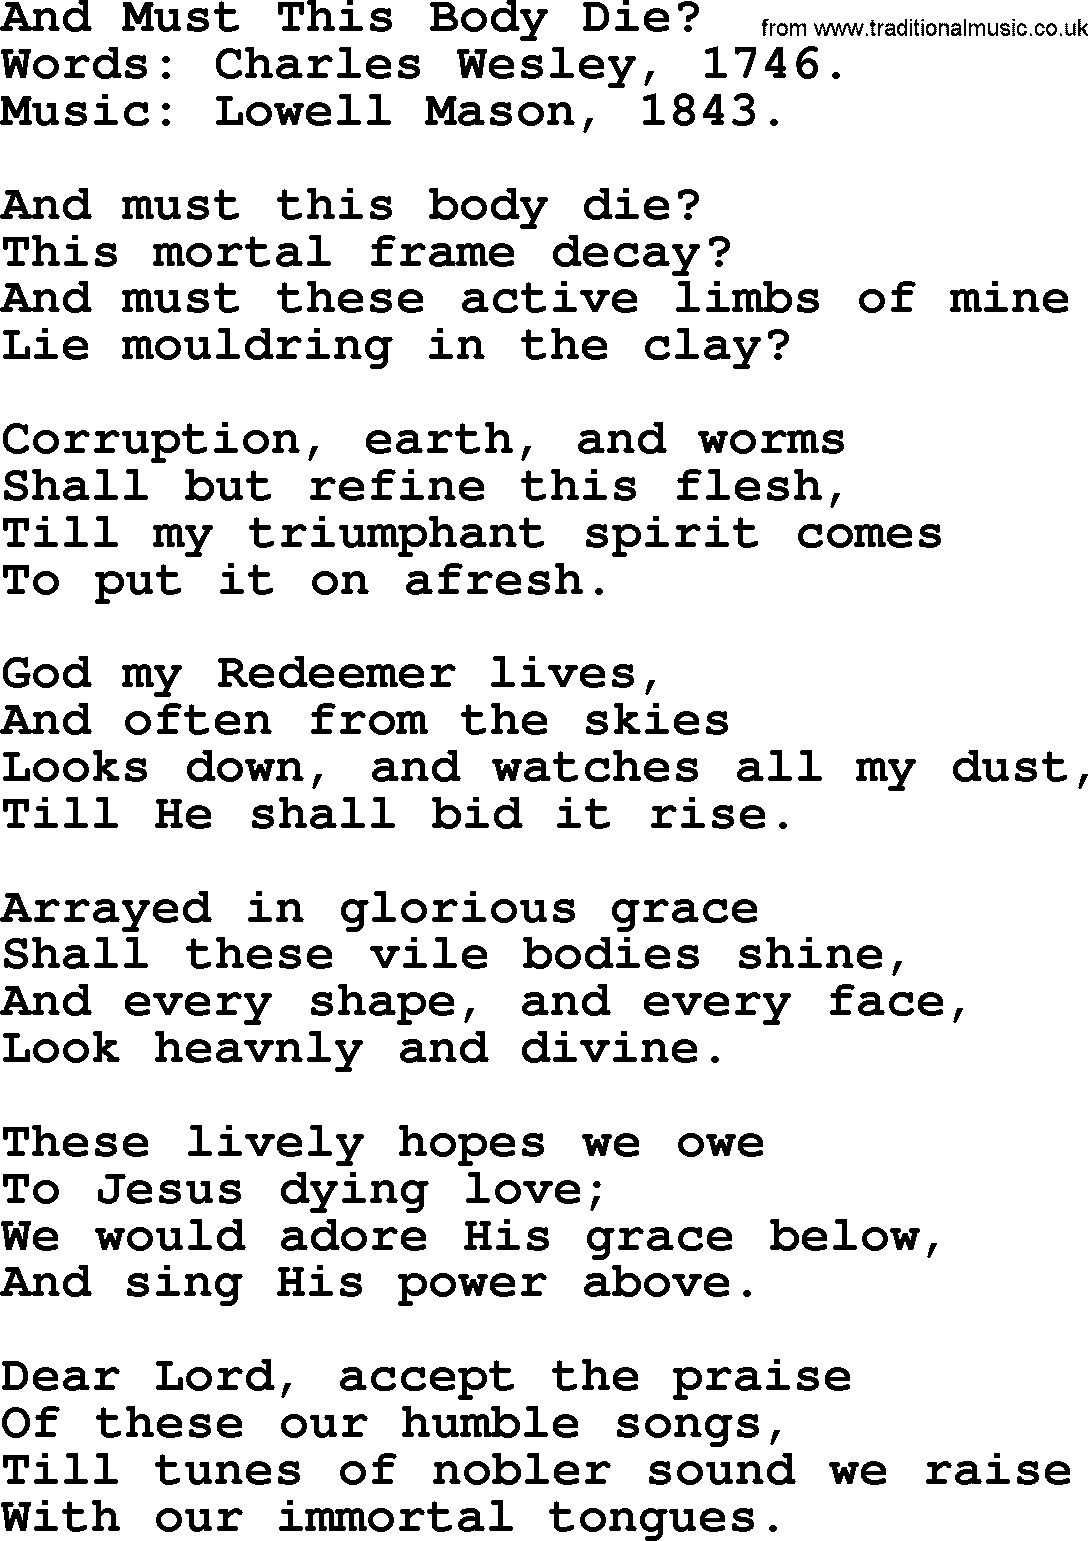 Isaac Watts Christian hymn: And Must This Body Die_- lyricss